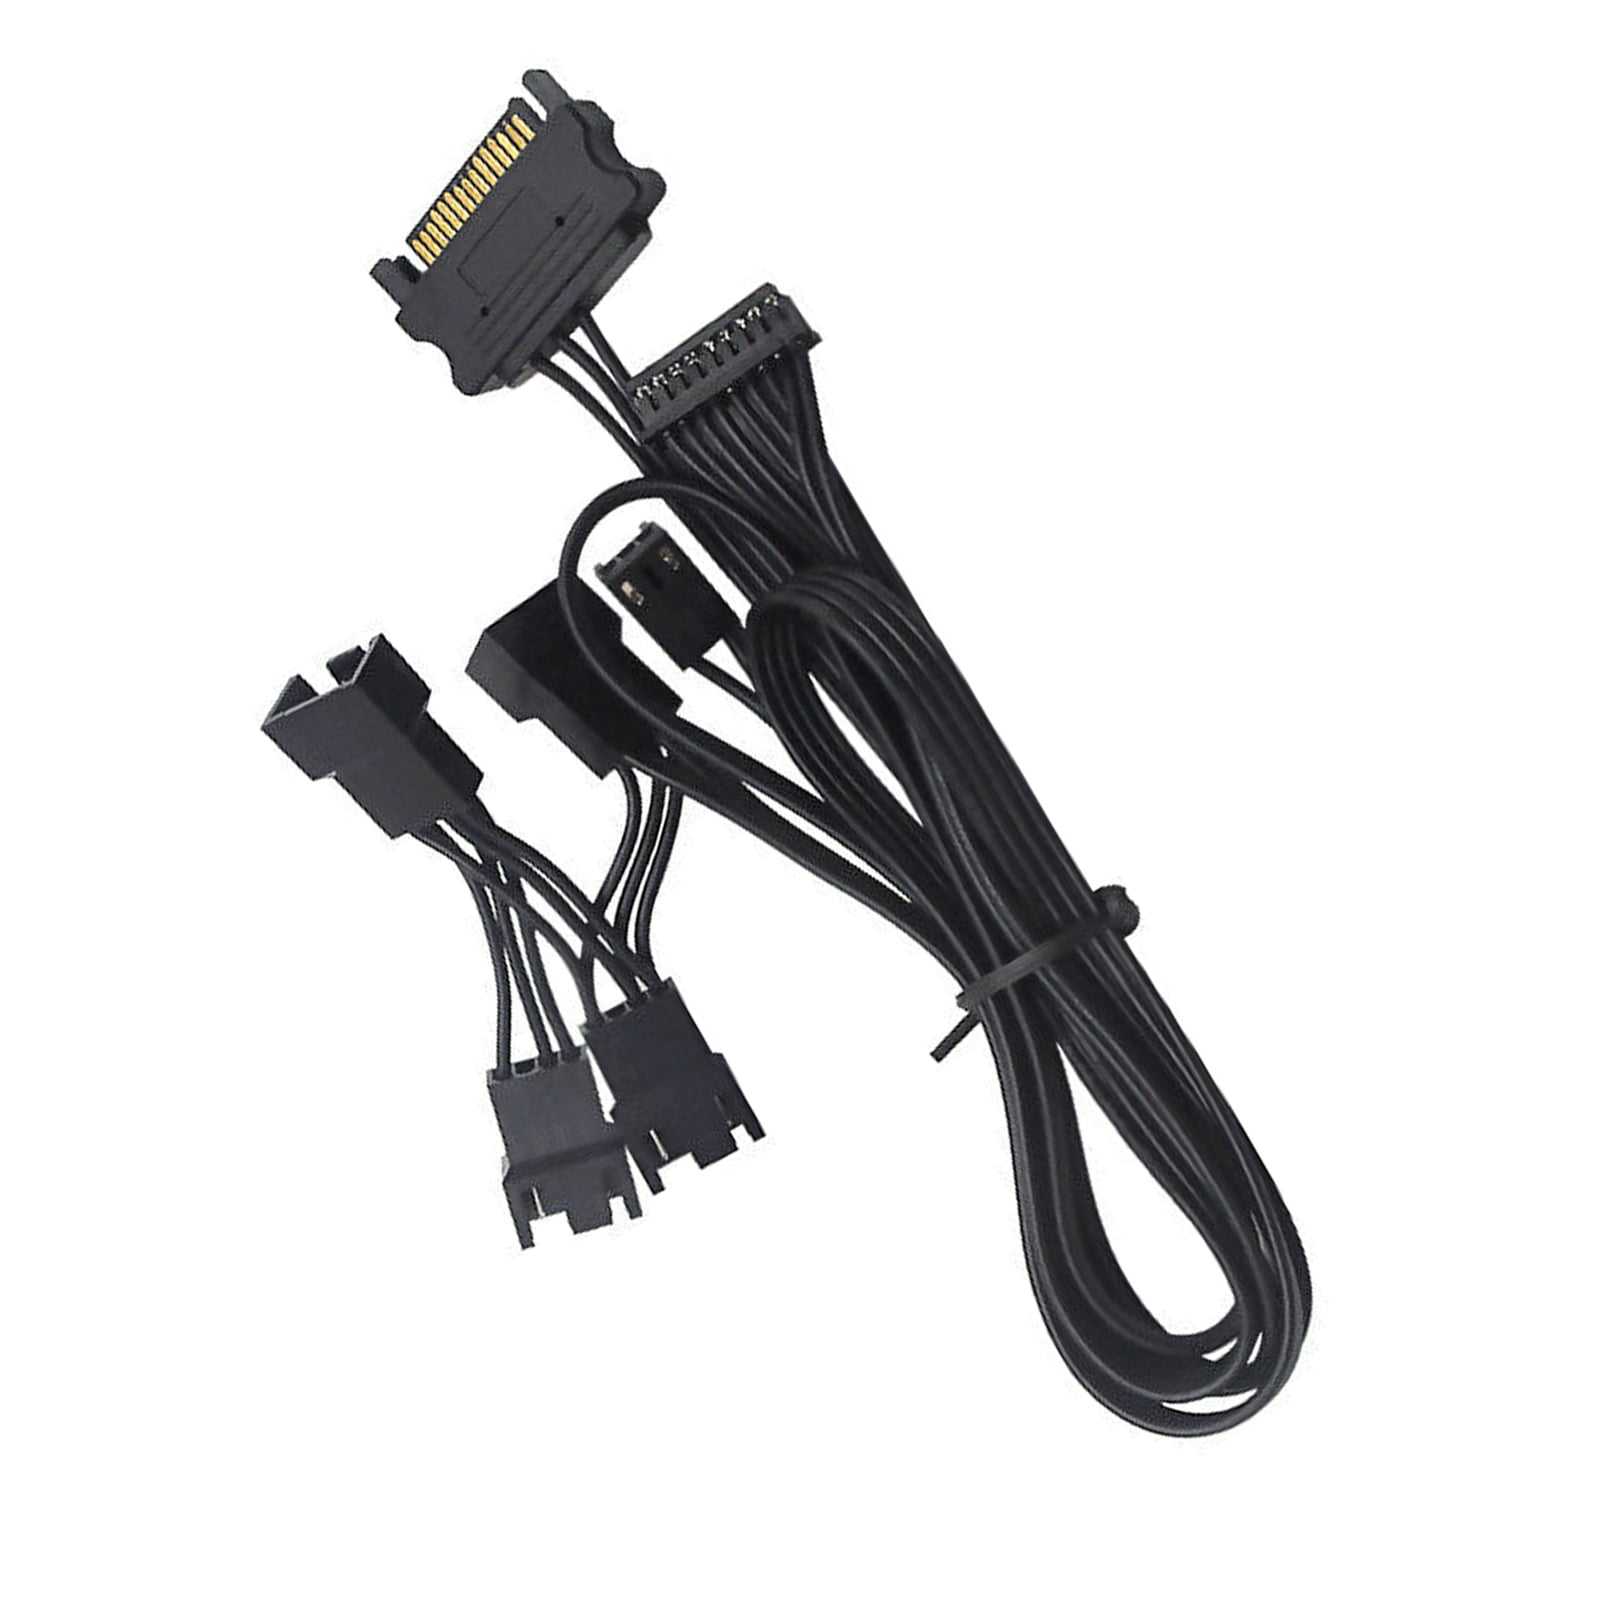 Gymark For Nzxt Kraken X62 Water Cooler 9 Pin Connector Cable Cord Wire Black Walmart Com